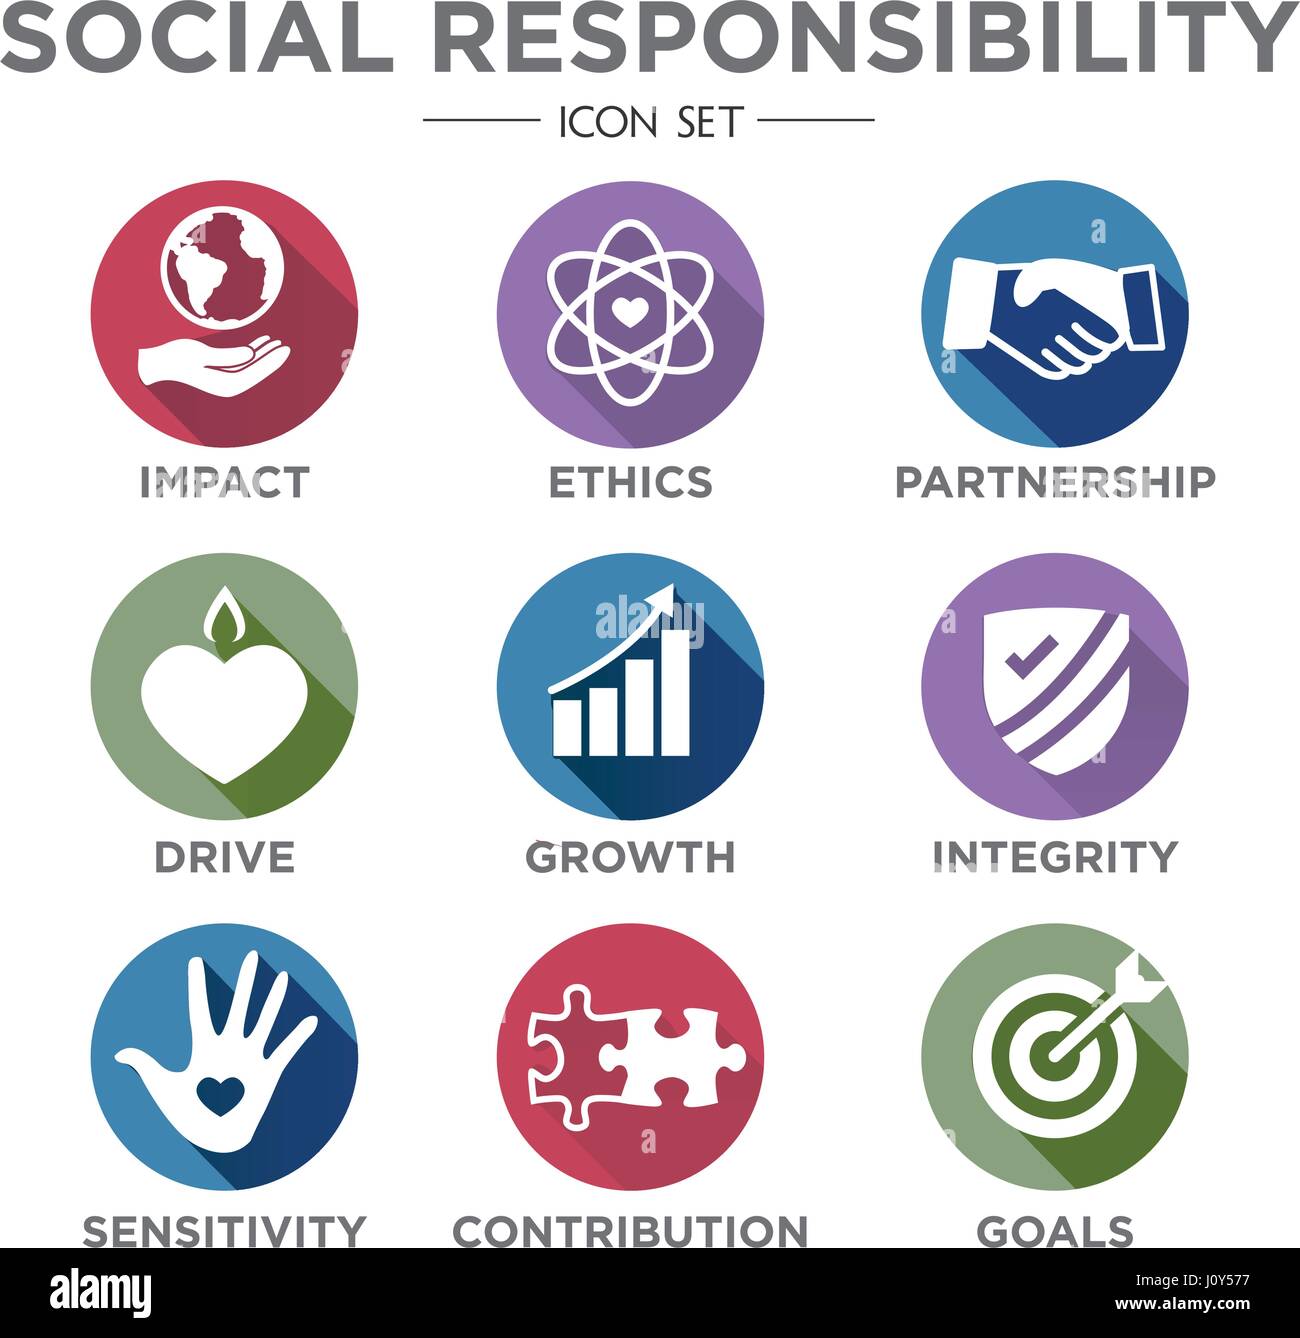 Social Responsibility Solid Icon Set with Impact, Ethics, Partnership, drive, etc Stock Vector